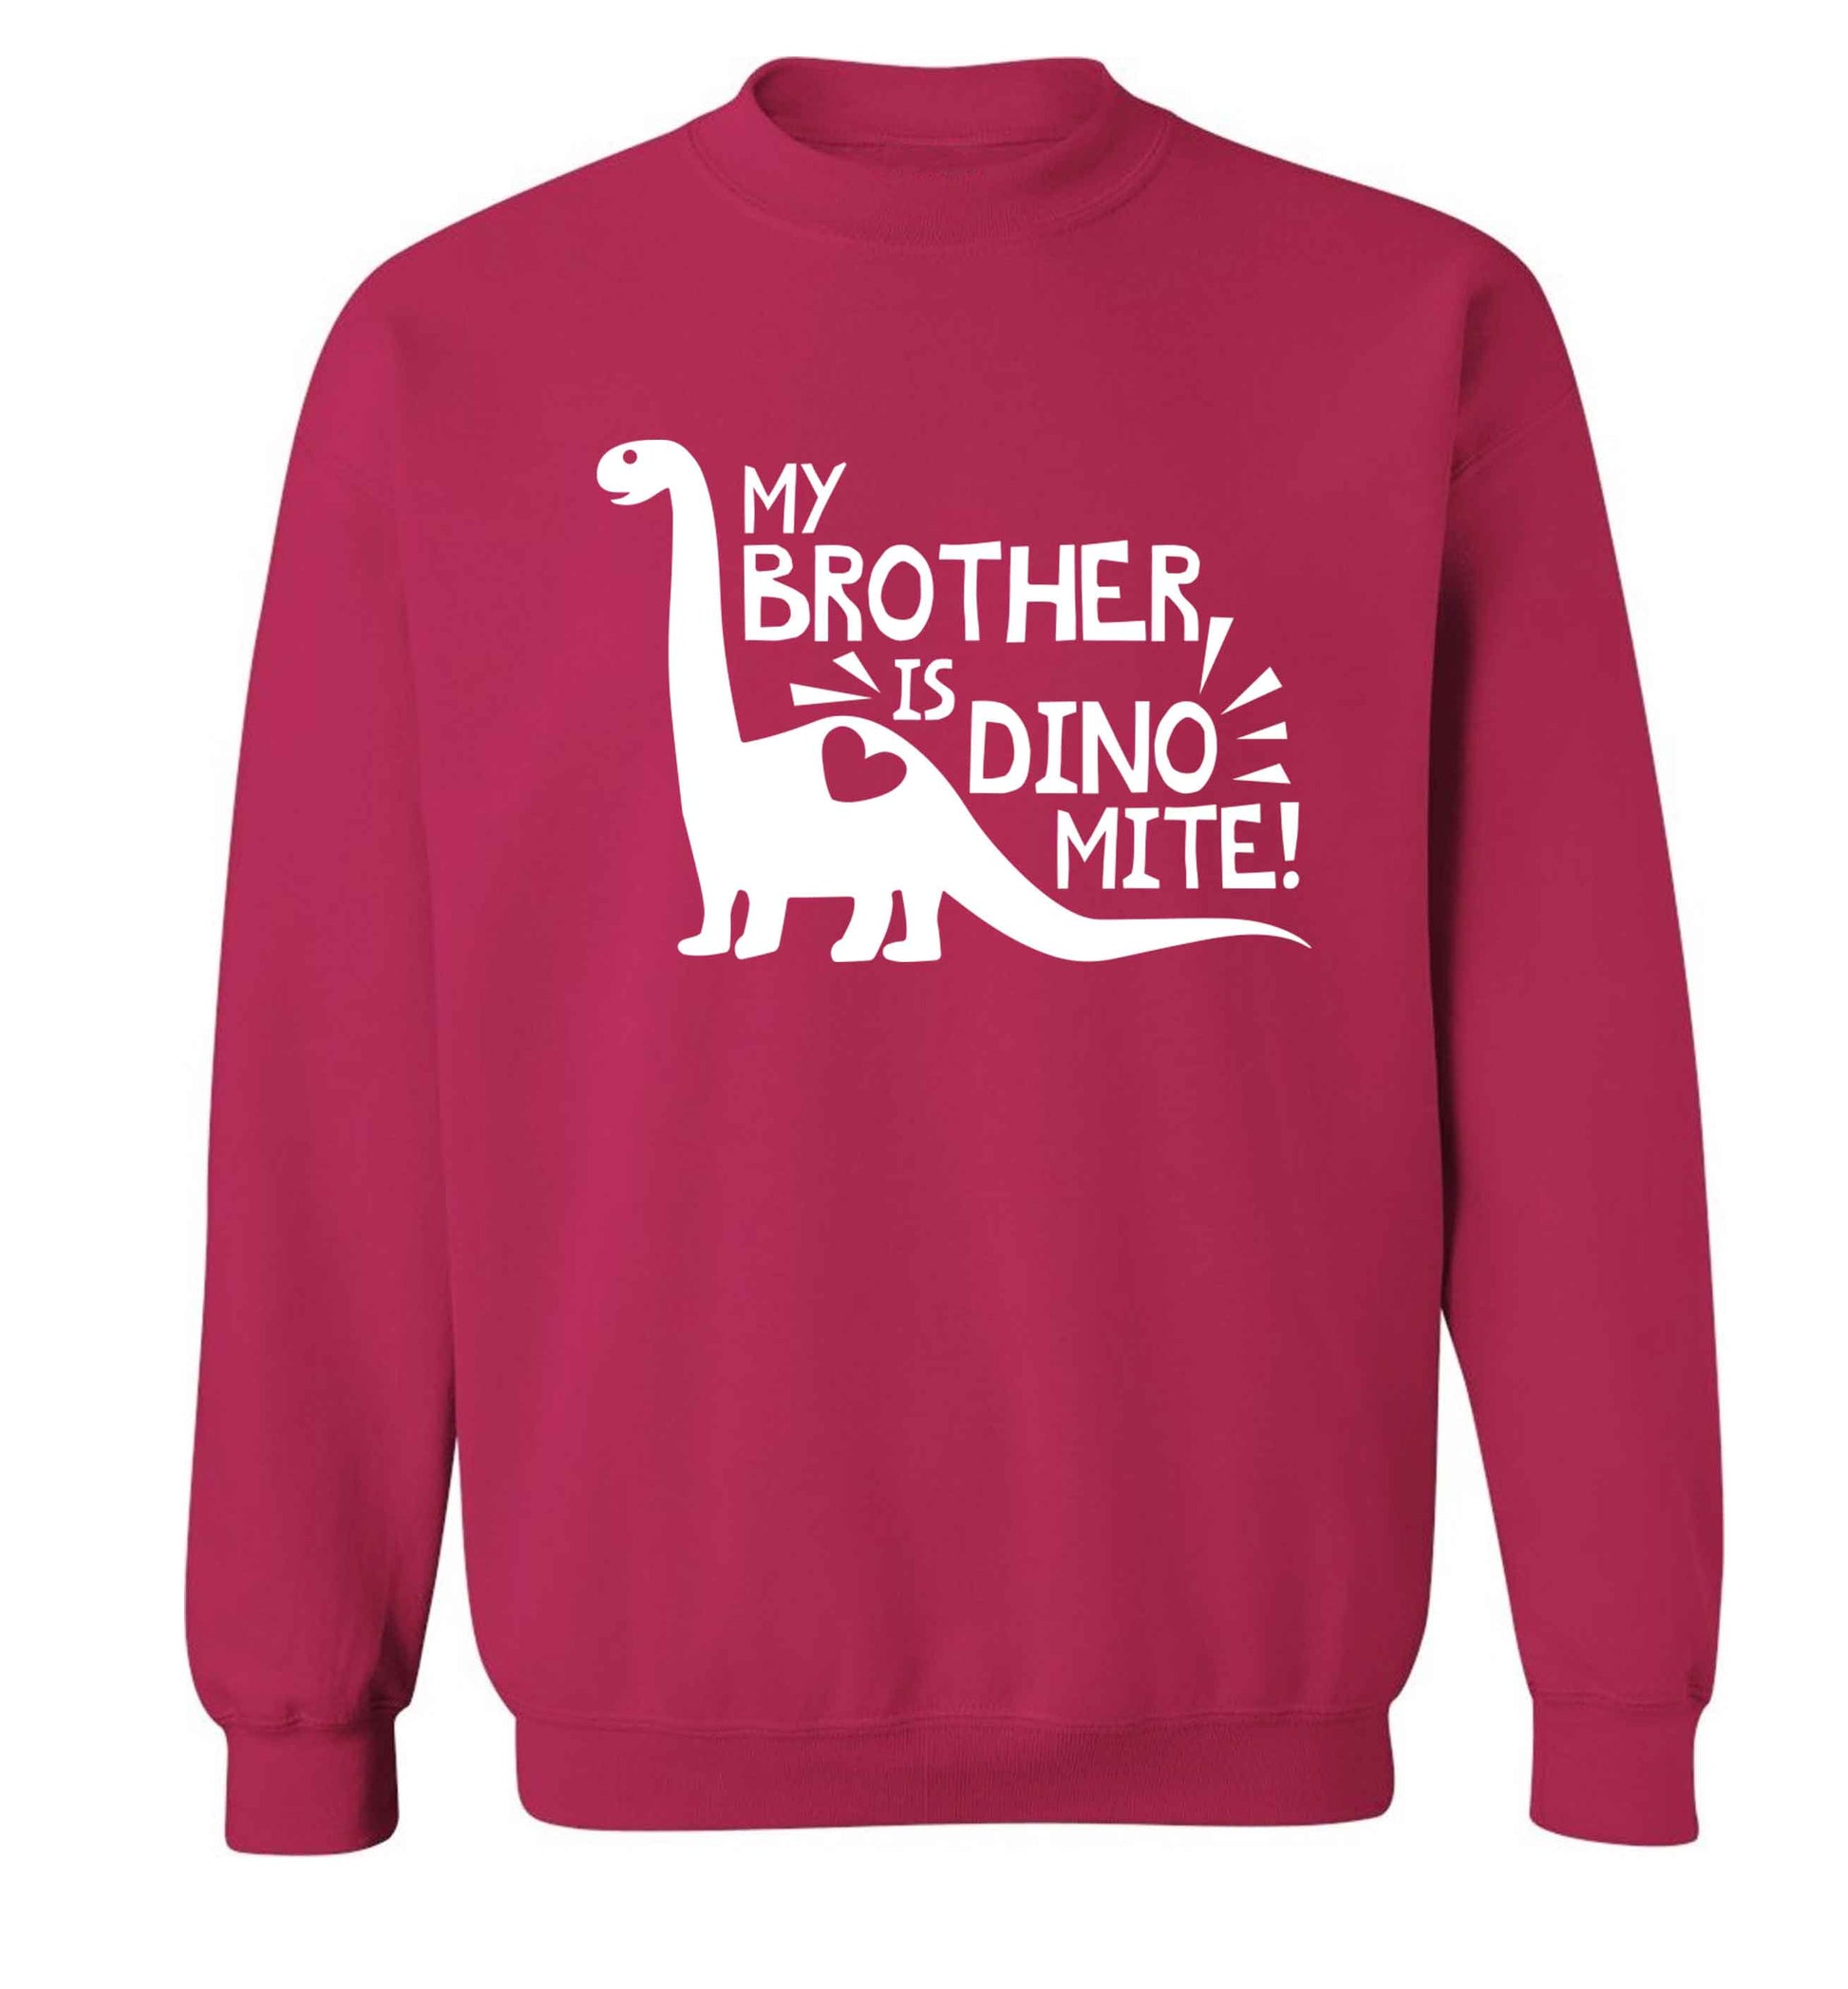 My brother is dinomite! Adult's unisex pink Sweater 2XL